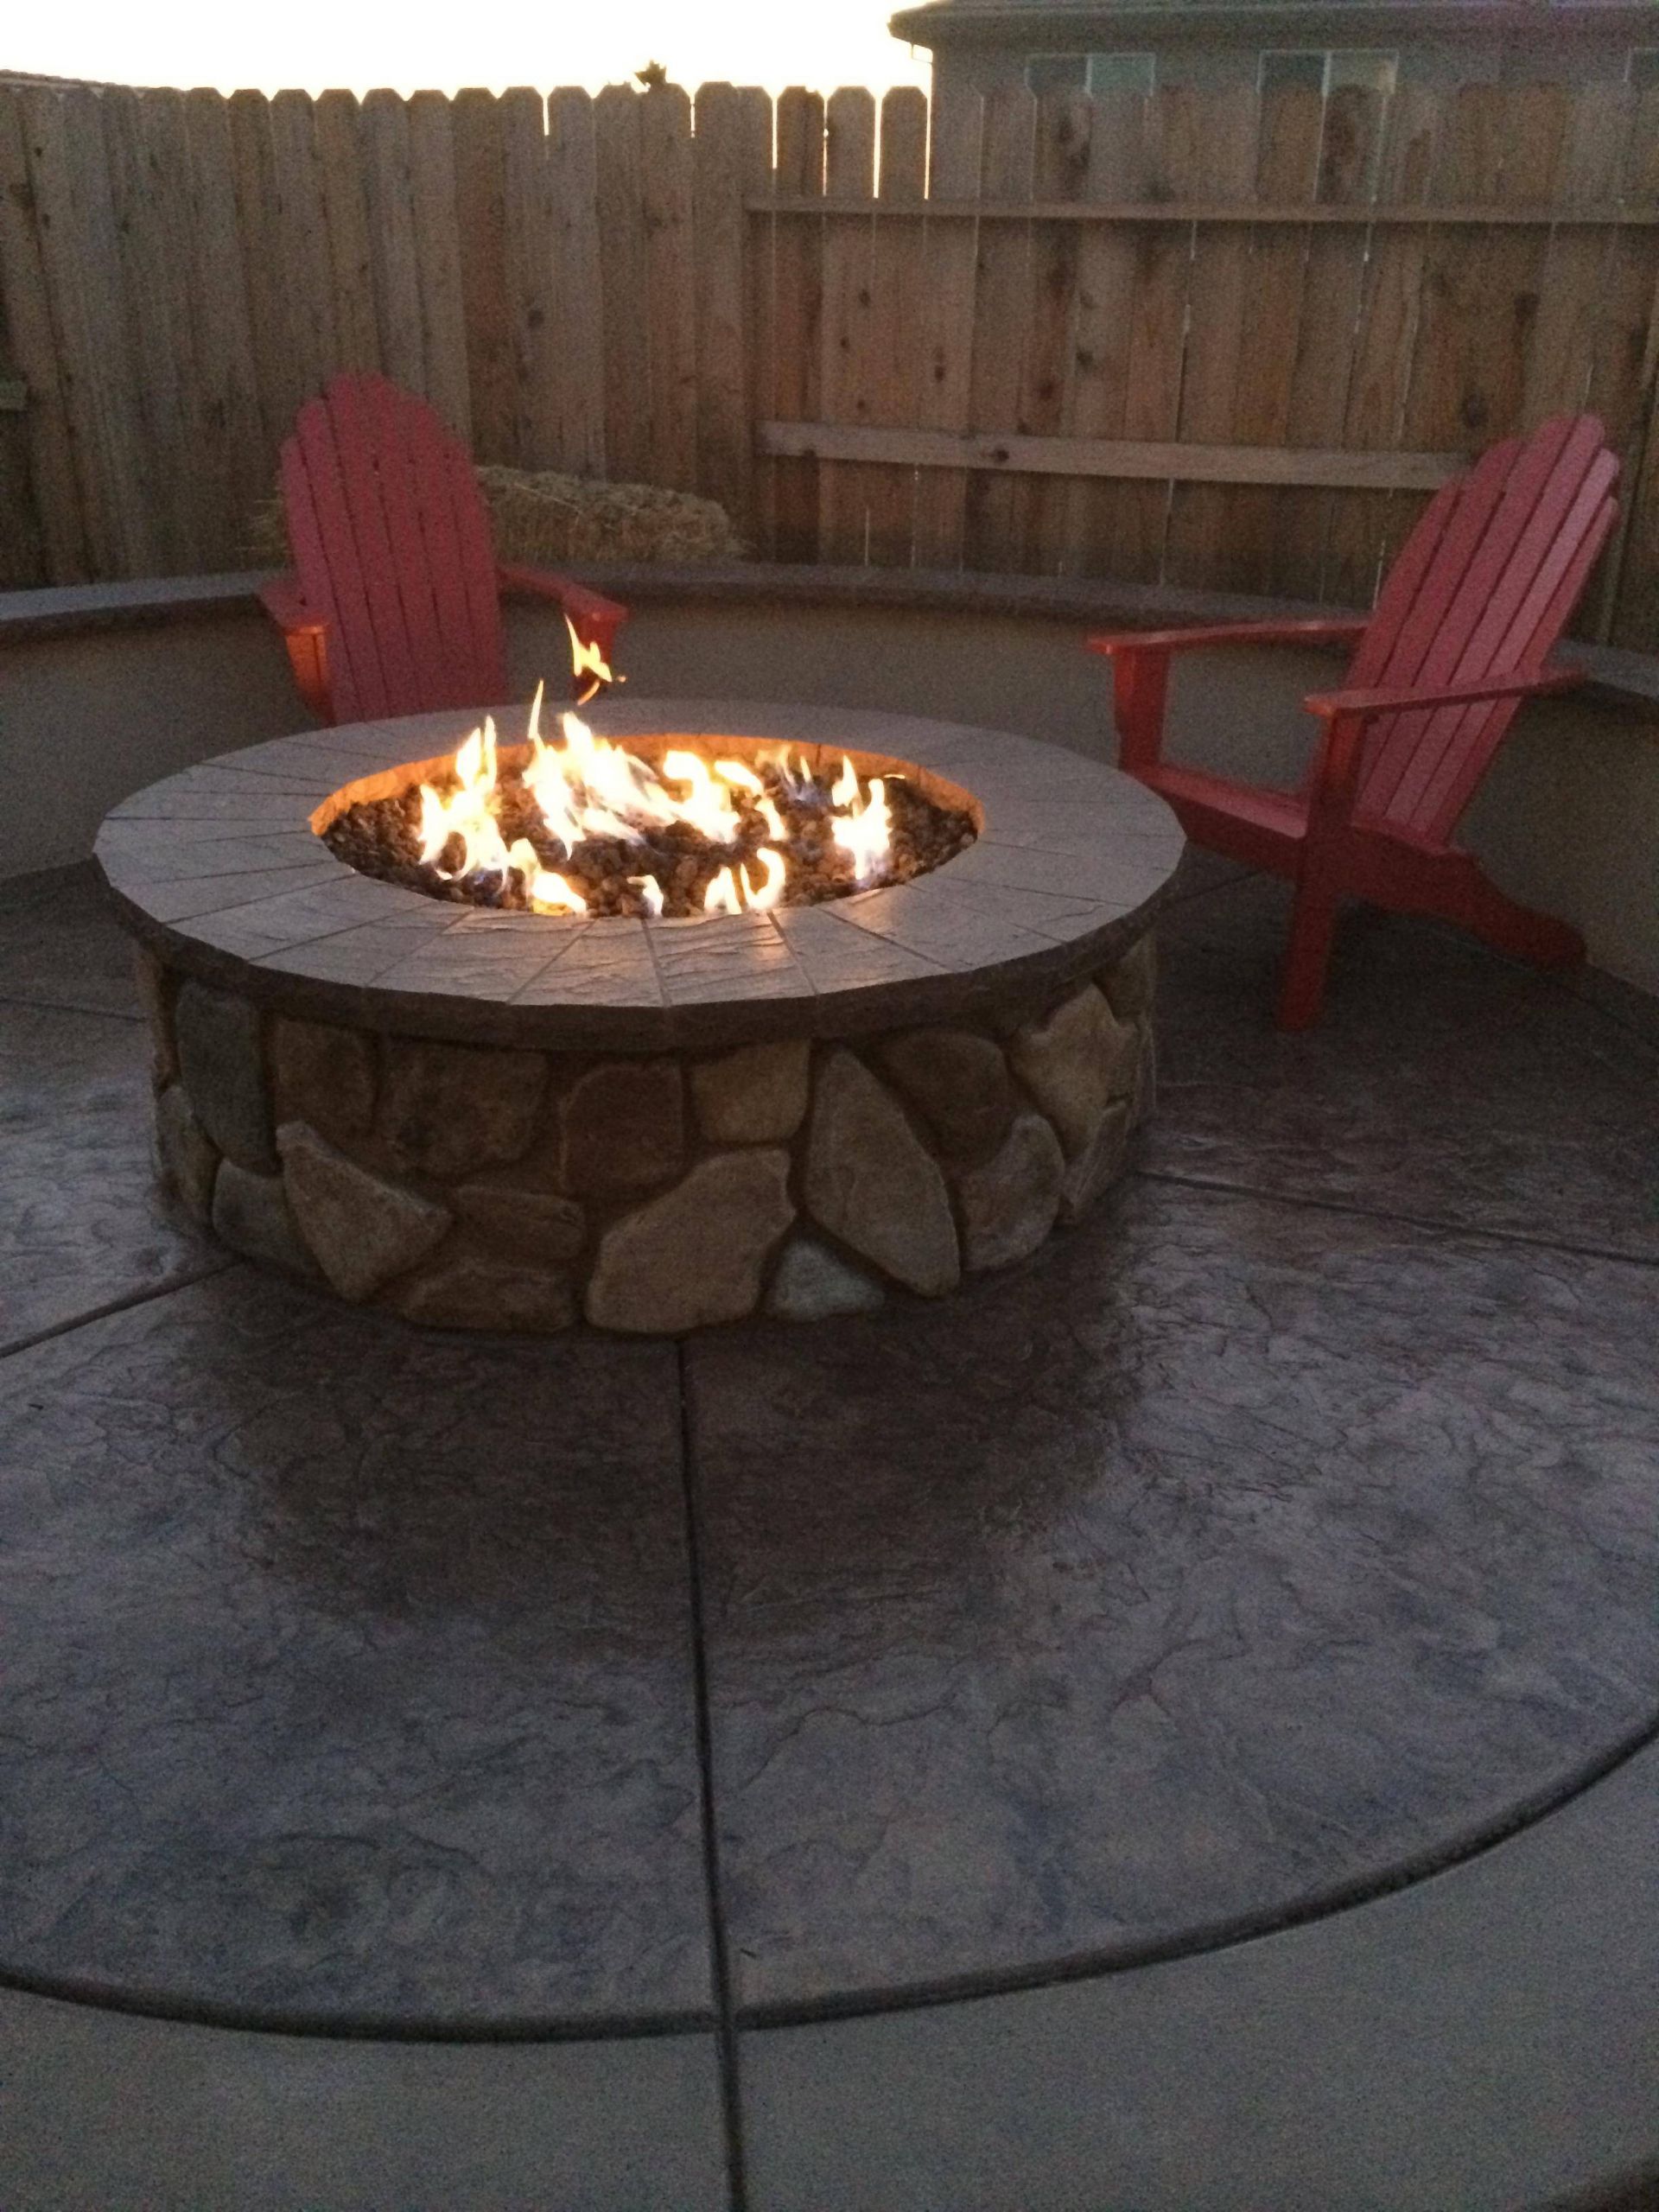 DIY Outdoor Gas Fire Pit
 fireplace How can I my gas fire pit to have a larger